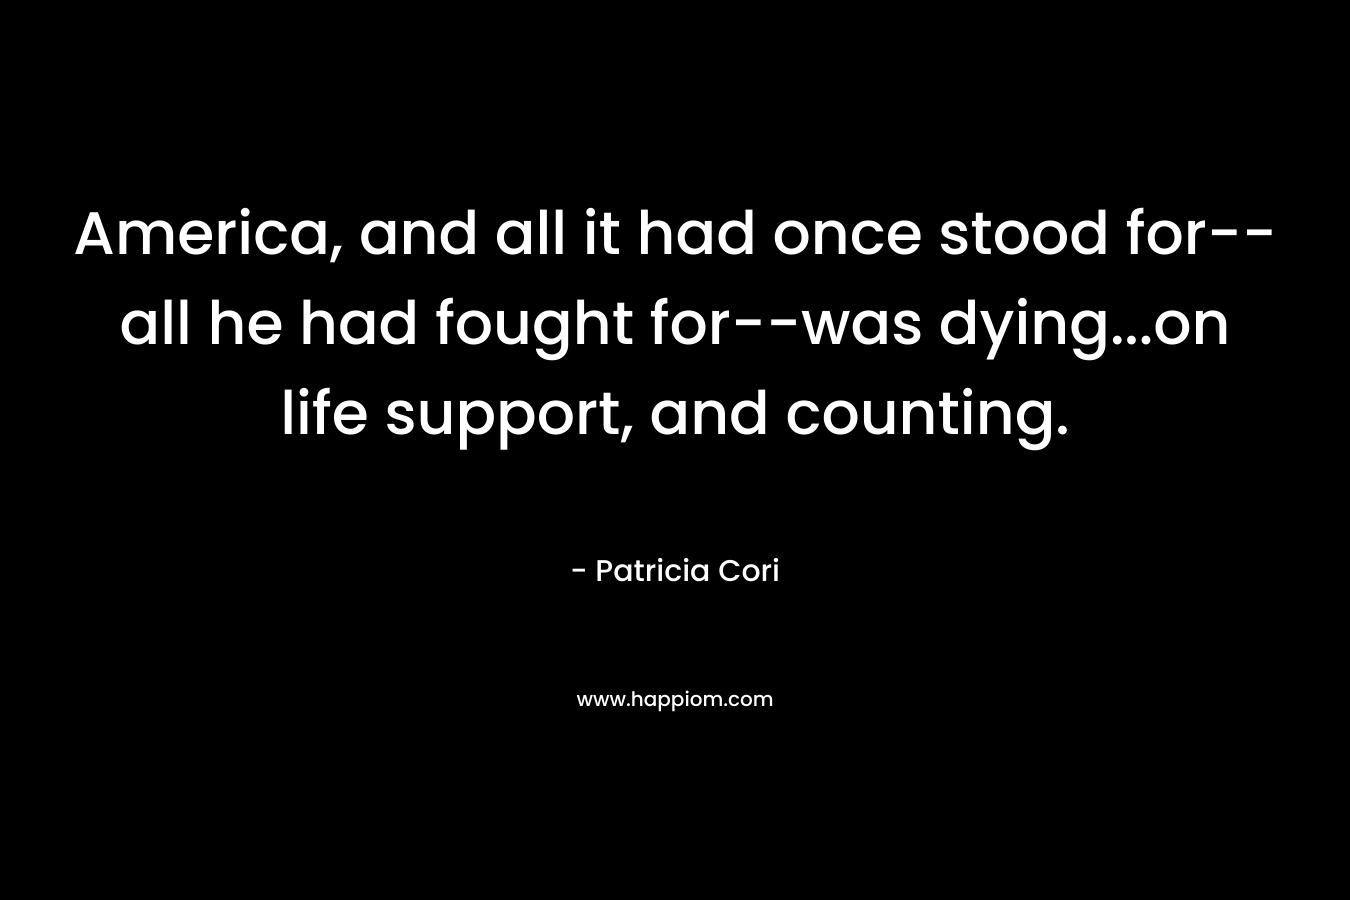 America, and all it had once stood for--all he had fought for--was dying...on life support, and counting.